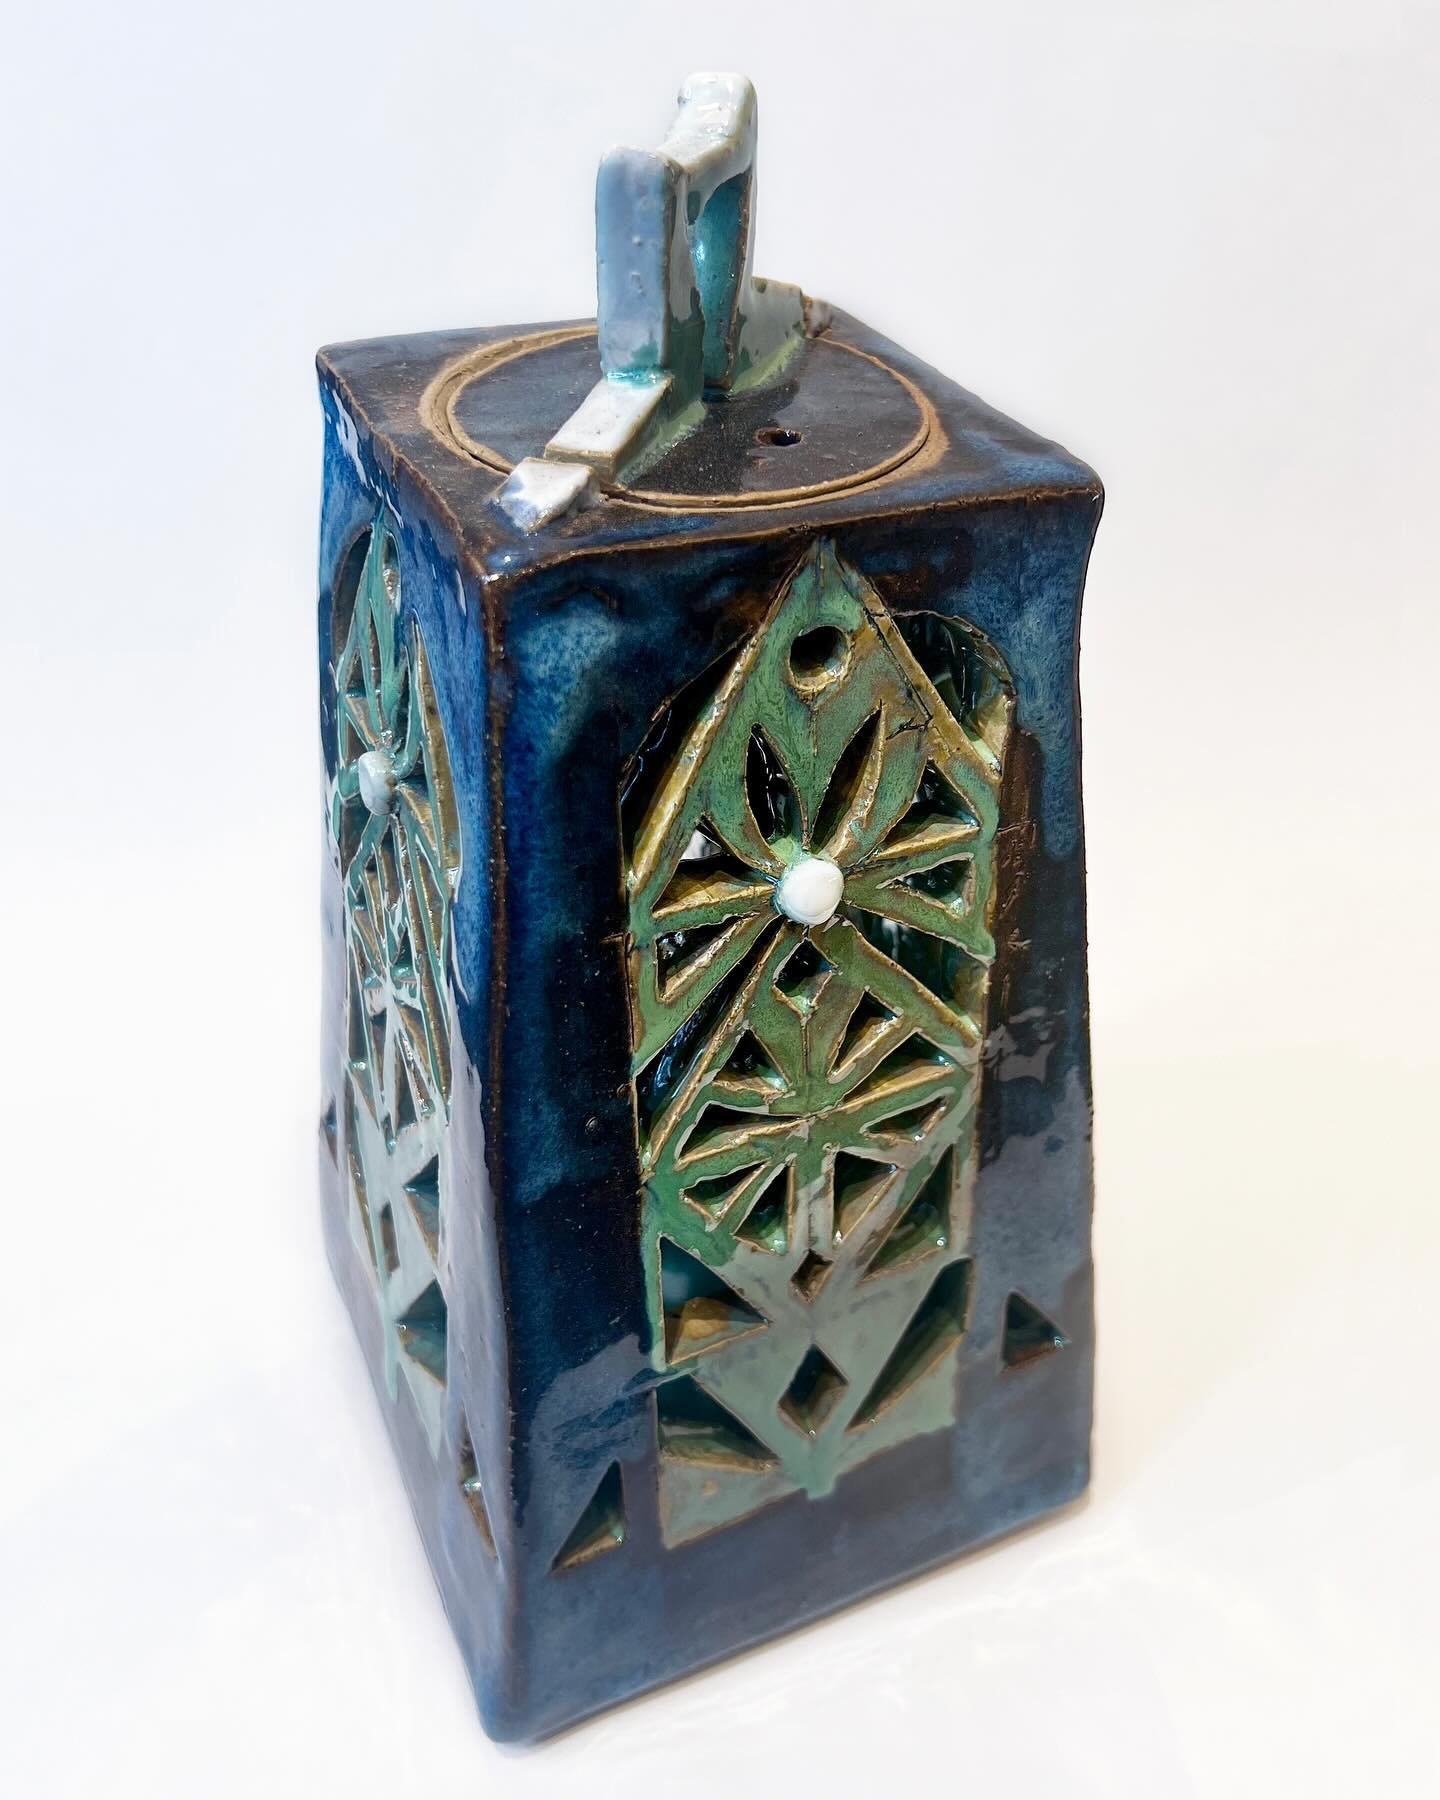 Pierced Box by Joanna Angell
Hand-built Stoneware

This exceptional handmade piece by Joanna Angel is now available exclusively from Kobo Gallery. Joanna has been a master of ceramics for over 30 years!
.
.
.
#KoboSav #KoboGallery #CeramicArt #Cerami